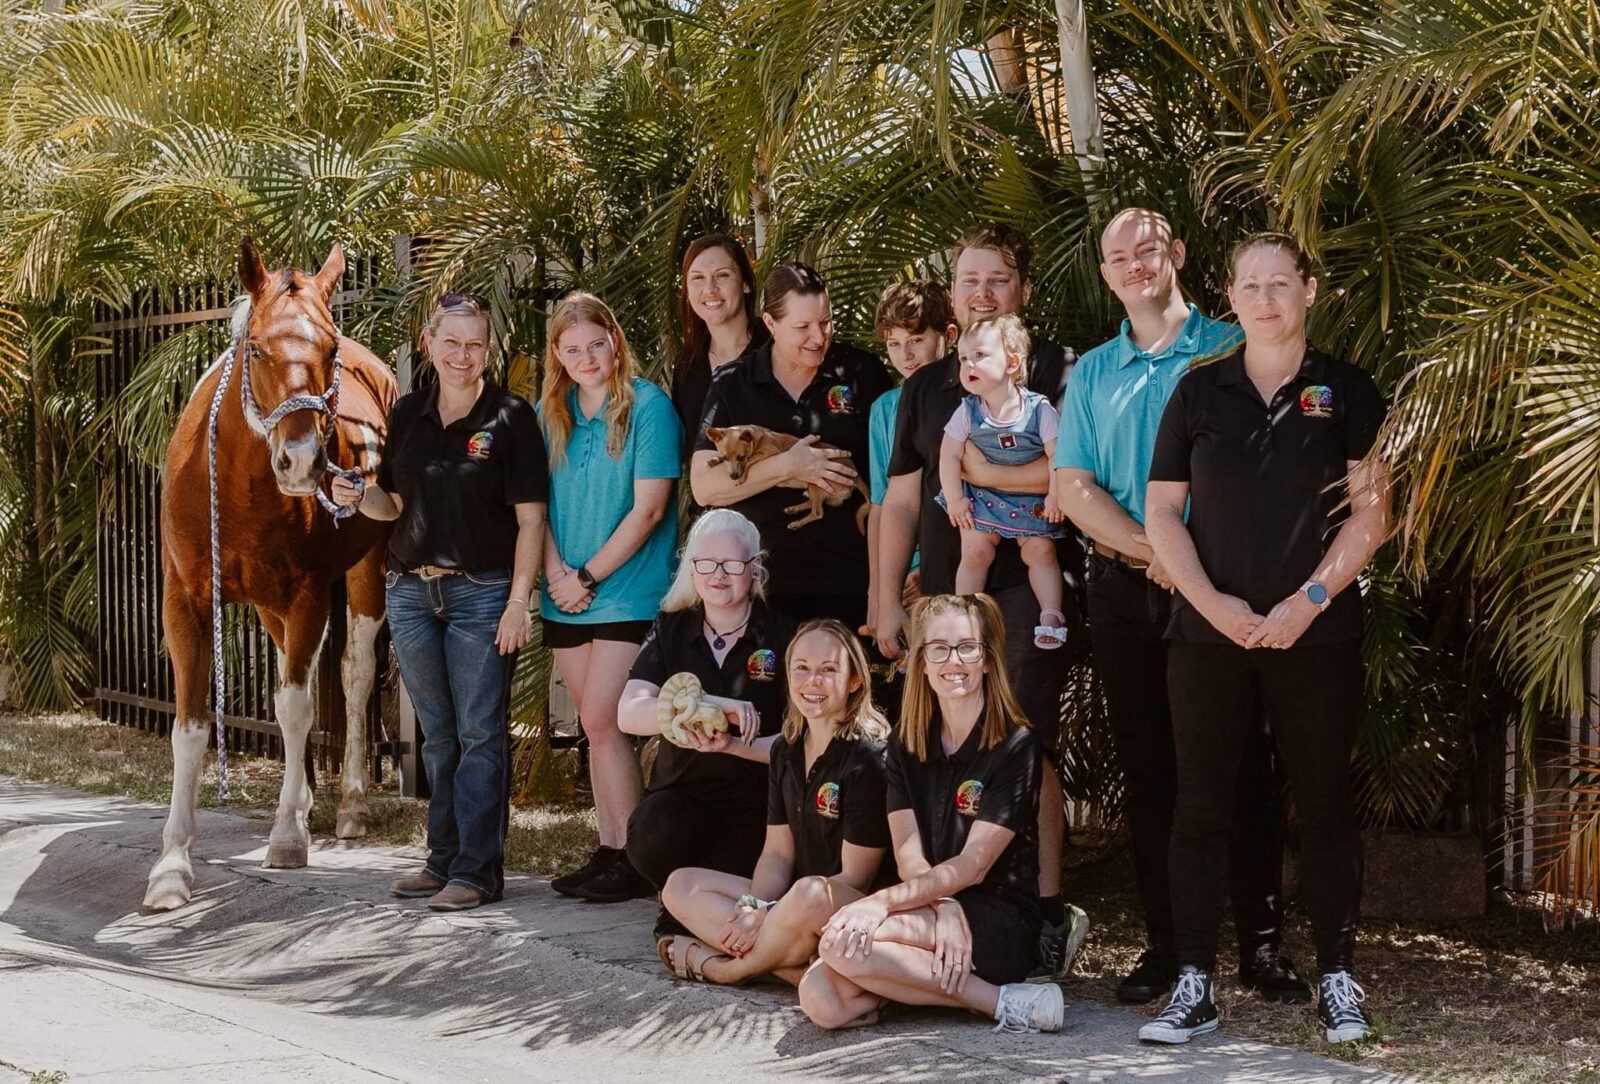 team photo showing some of the animals used in therapy- horse, snake, dog